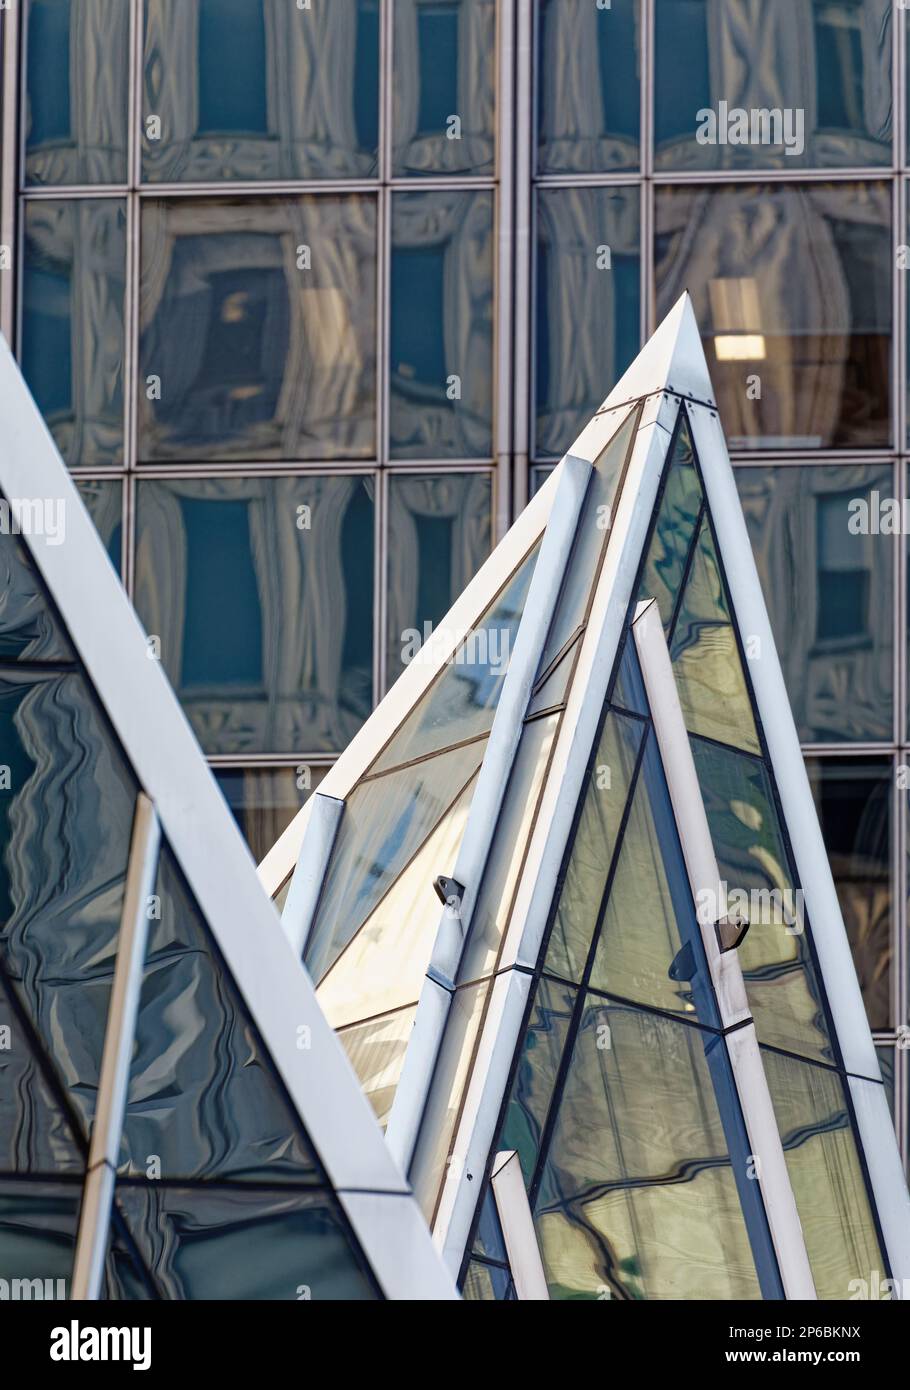 Chrysler Trylons, designed by postmodern master Philip Johnson, is notable for its steel-framed glass pyramids, shown here against 666 Third Avenue. Stock Photo